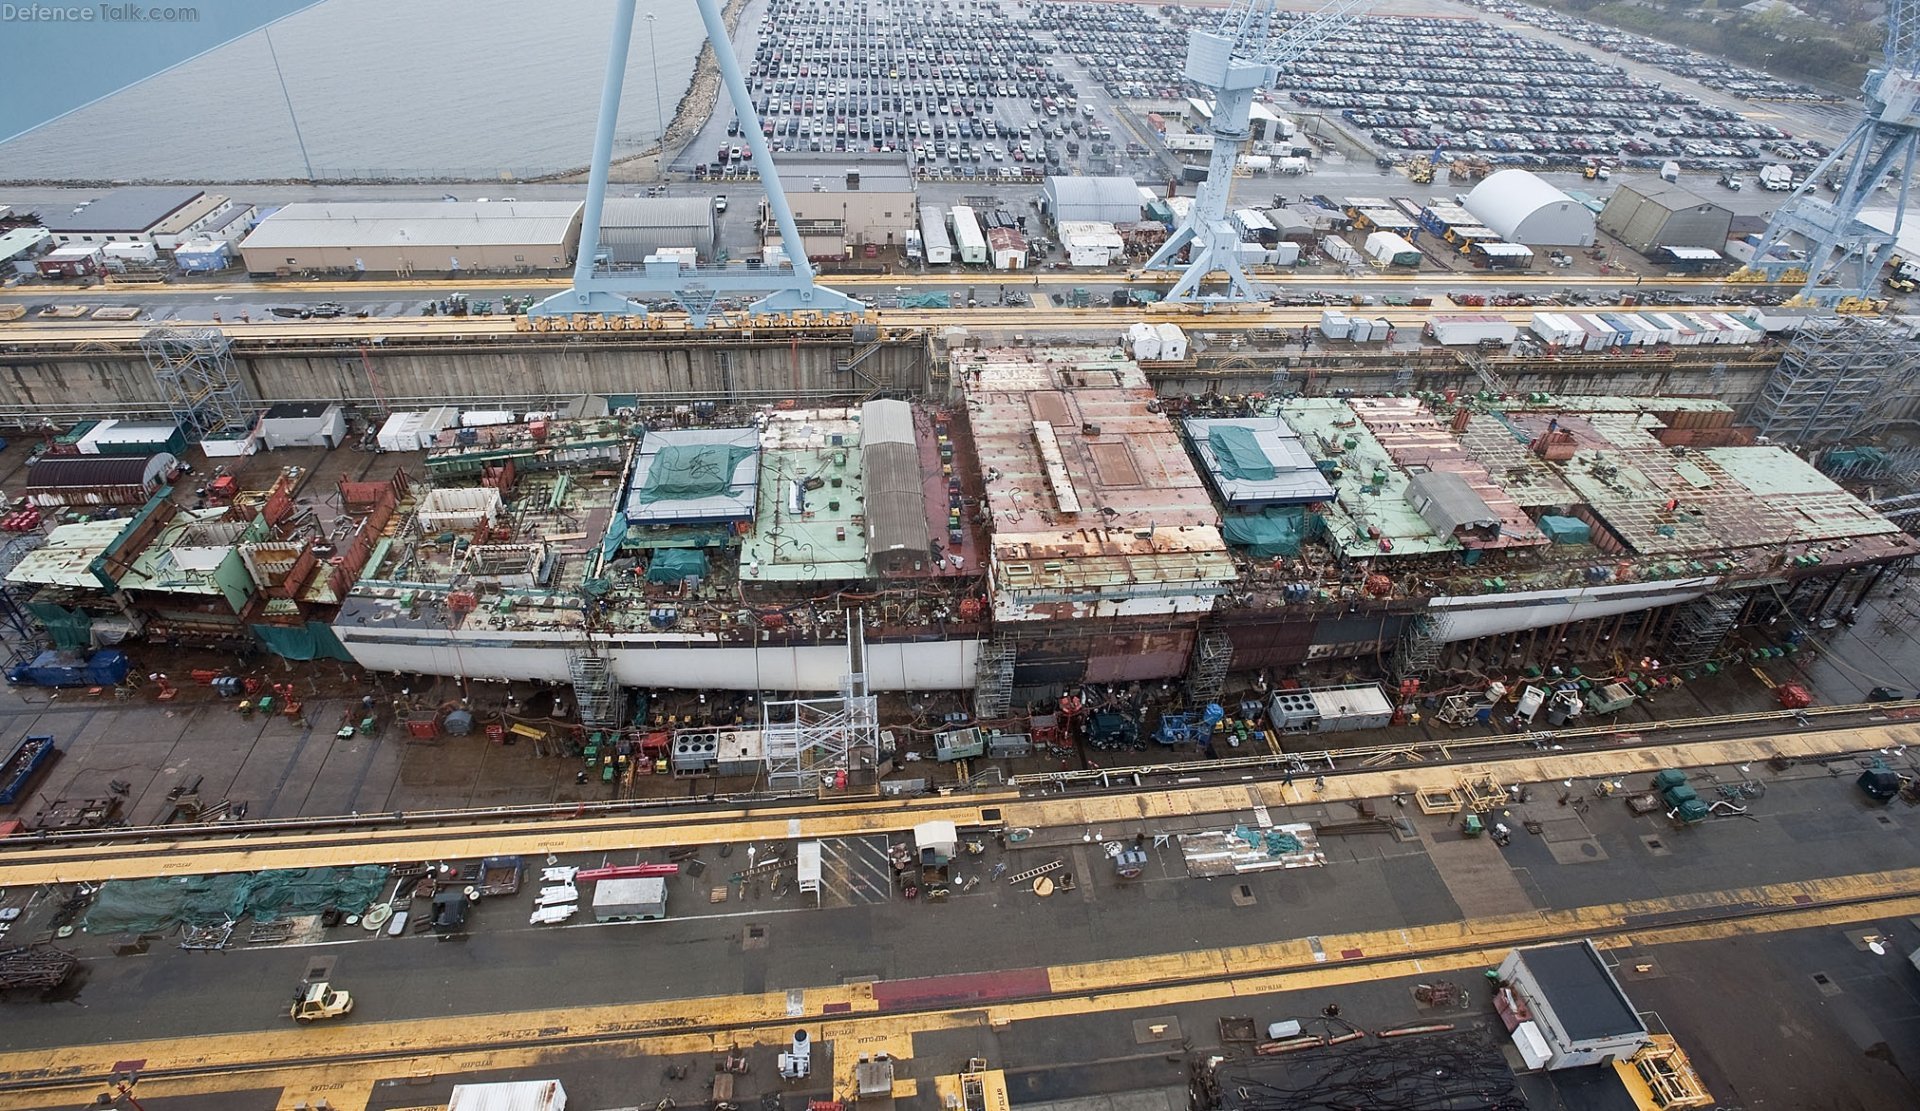 USS Gerald R. Ford, CVN-78 50% complete